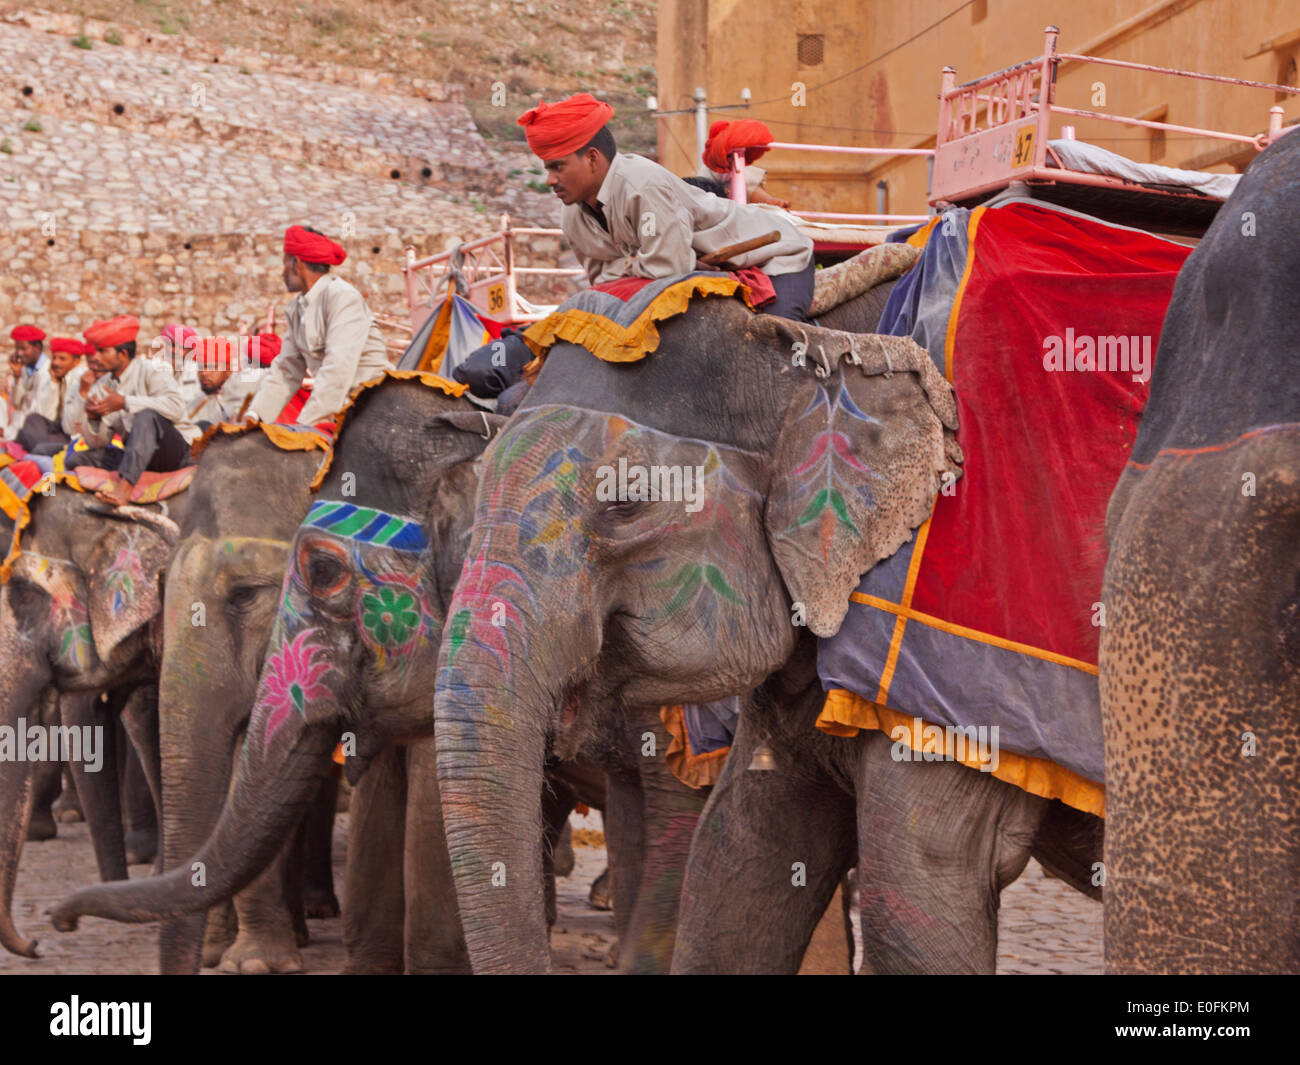 Mahouts and their elephants waiting to convey tourists up a steep incline to the 16th century Amber fortress in Rajasthan, India Stock Photo